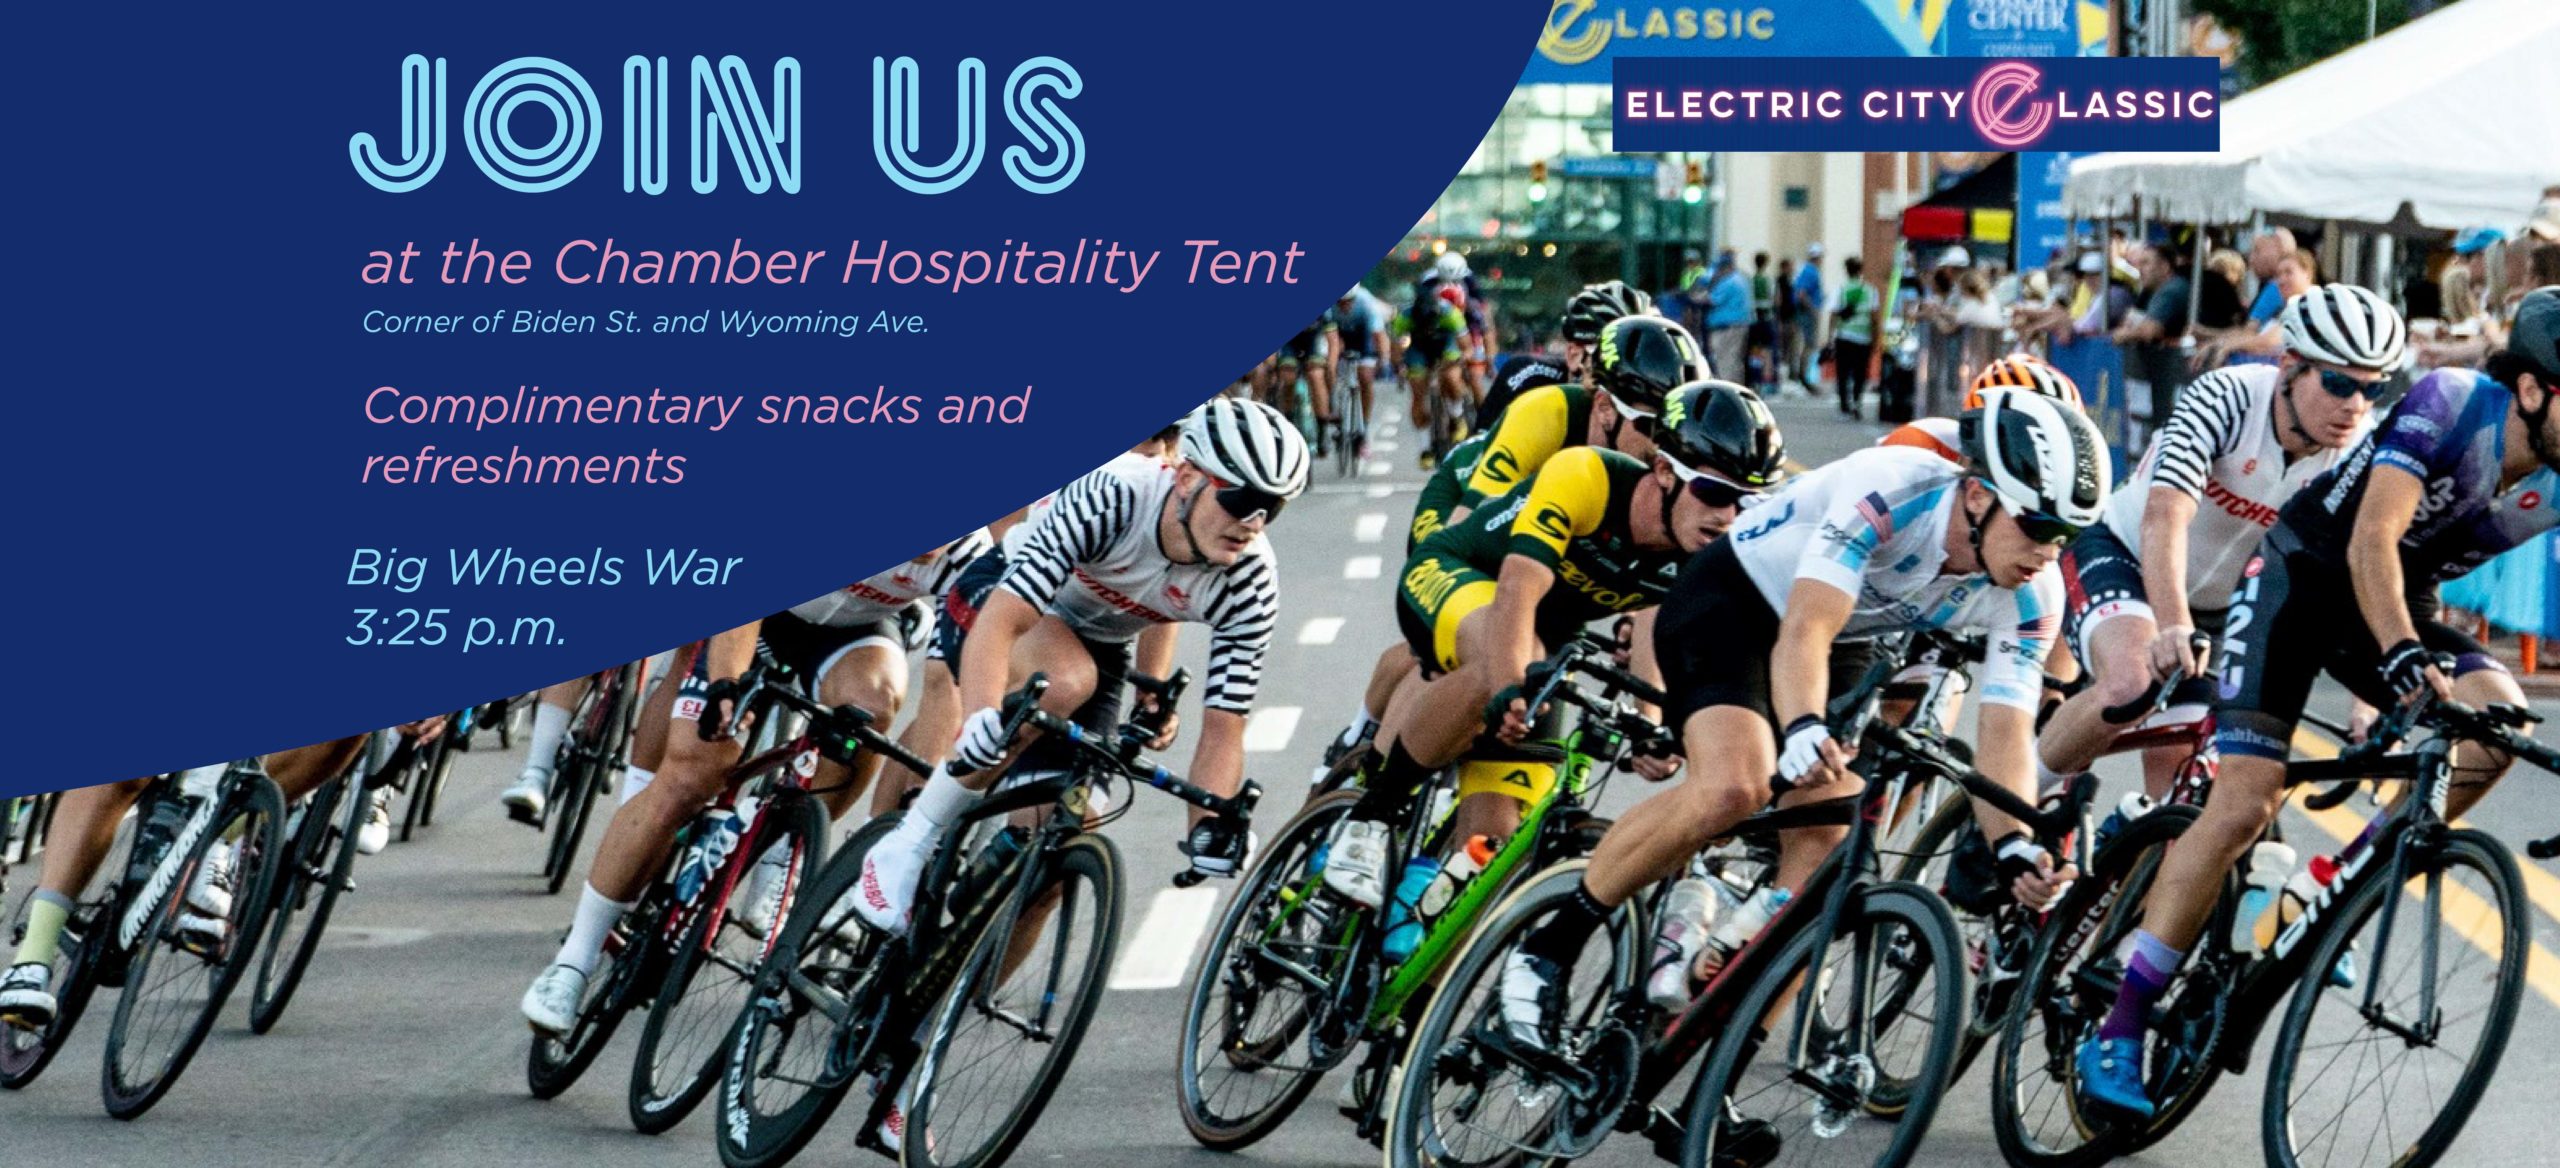 Electric City Classic Chamber Hospitality Tent